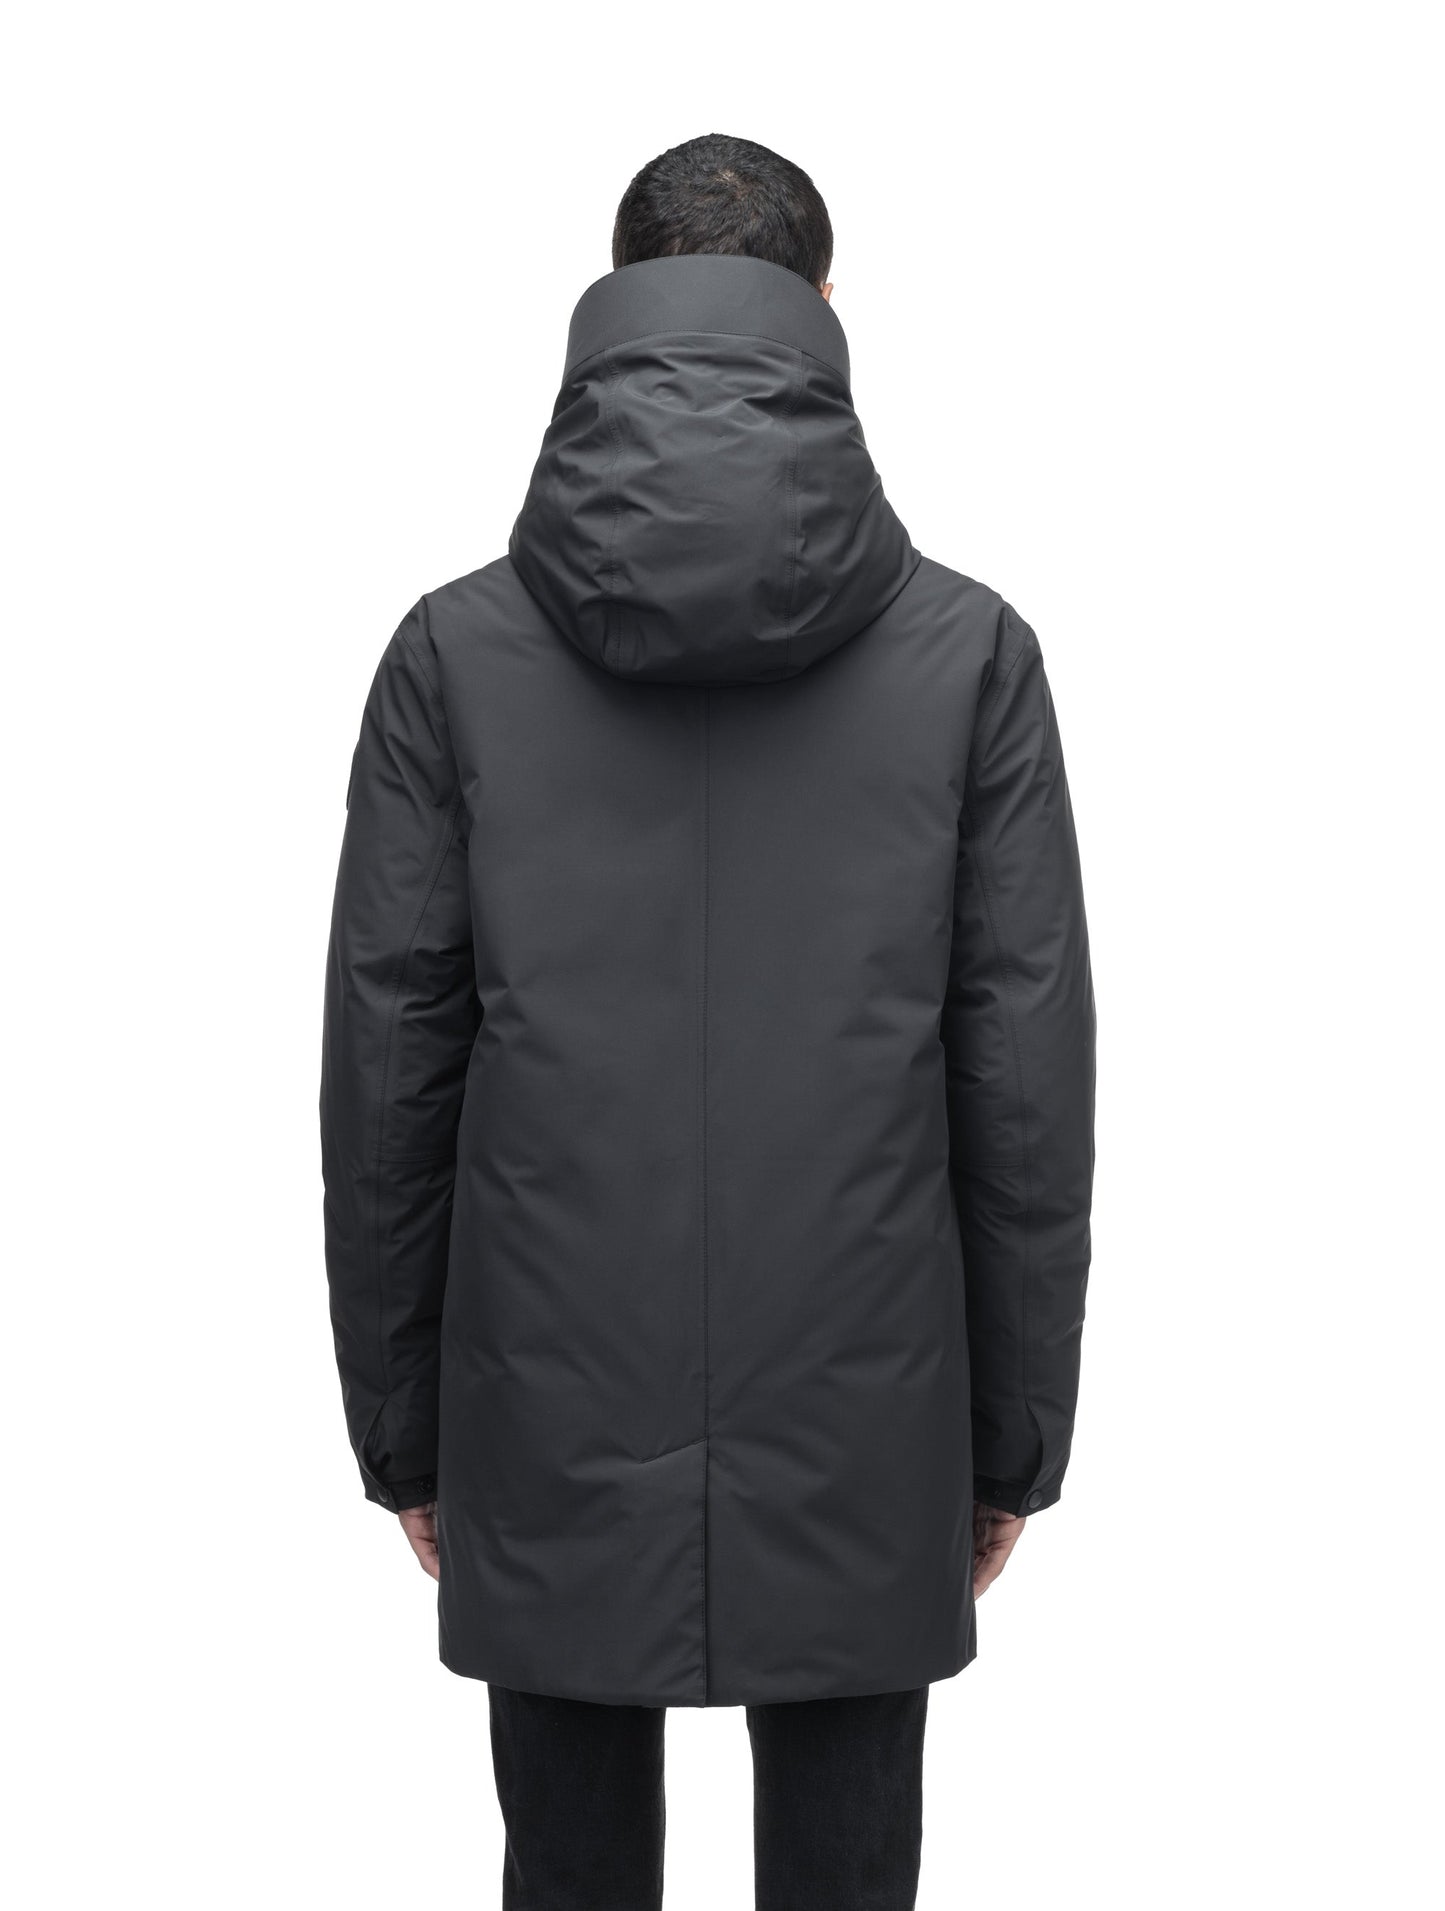 Atlas Men's Performance Parka in thigh length, Canadian duck down insulation, removable hood, and two-way zipper, in Black